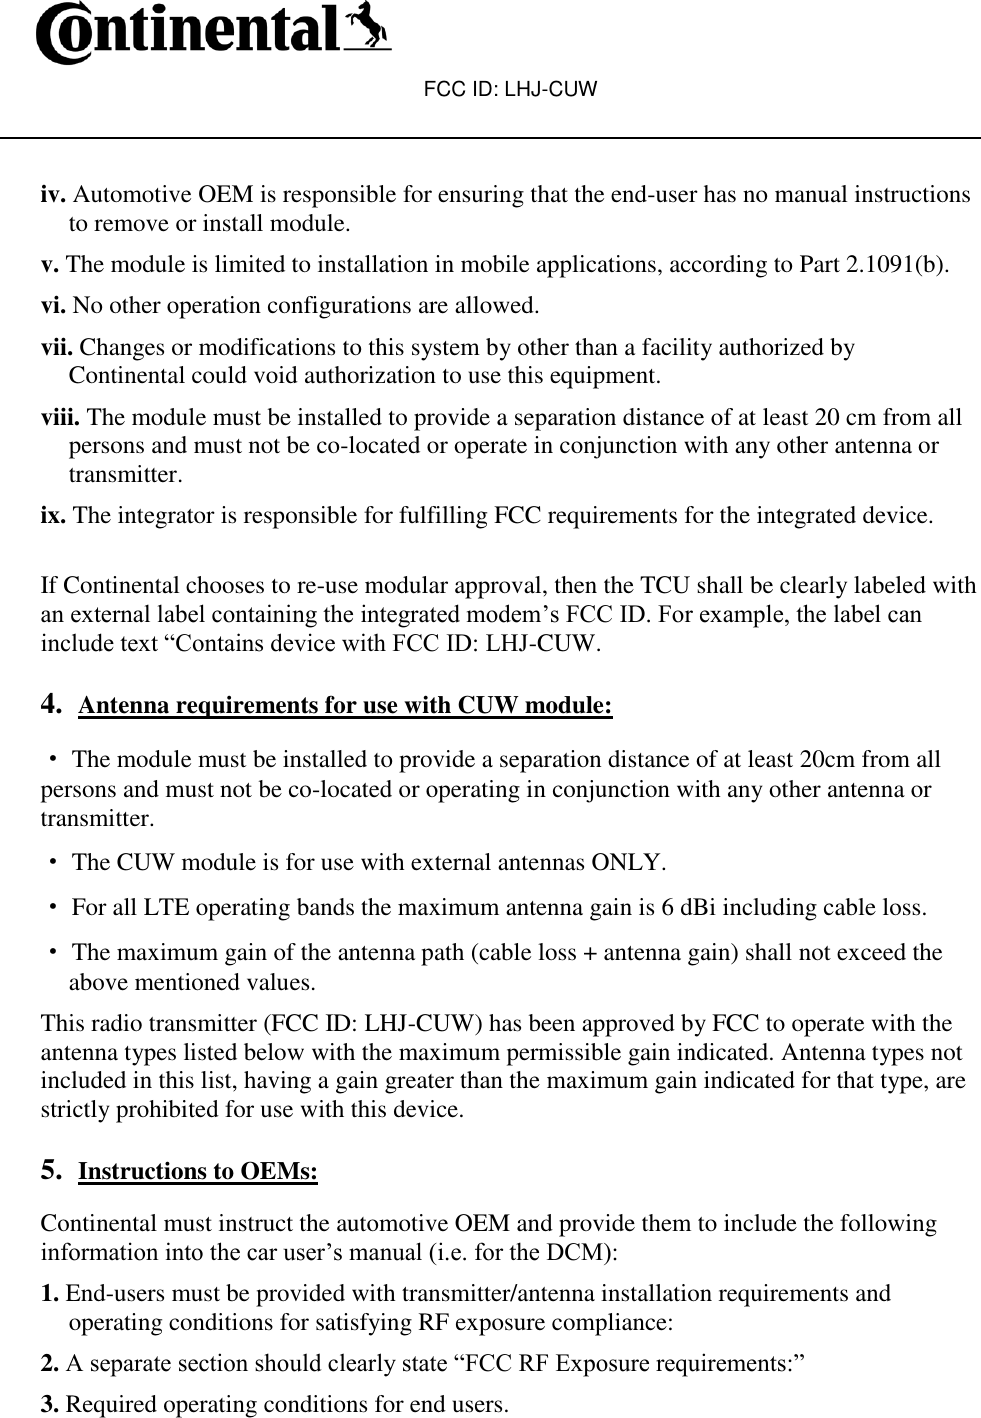 FCC ID: LHJ-CUW    iv. Automotive OEM is responsible for ensuring that the end-user has no manual instructions to remove or install module. v. The module is limited to installation in mobile applications, according to Part 2.1091(b). vi. No other operation configurations are allowed. vii. Changes or modifications to this system by other than a facility authorized by Continental could void authorization to use this equipment. viii. The module must be installed to provide a separation distance of at least 20 cm from all persons and must not be co-located or operate in conjunction with any other antenna or transmitter. ix. The integrator is responsible for fulfilling FCC requirements for the integrated device.  If Continental chooses to re-use modular approval, then the TCU shall be clearly labeled with an external label containing the integrated modem’s FCC ID. For example, the label can include text “Contains device with FCC ID: LHJ-CUW.  4. Antenna requirements for use with CUW module:  ·The module must be installed to provide a separation distance of at least 20cm from all persons and must not be co-located or operating in conjunction with any other antenna or transmitter. · The CUW module is for use with external antennas ONLY. · For all LTE operating bands the maximum antenna gain is 6 dBi including cable loss. · The maximum gain of the antenna path (cable loss + antenna gain) shall not exceed the above mentioned values. This radio transmitter (FCC ID: LHJ-CUW) has been approved by FCC to operate with the antenna types listed below with the maximum permissible gain indicated. Antenna types not included in this list, having a gain greater than the maximum gain indicated for that type, are strictly prohibited for use with this device.  5. Instructions to OEMs:  Continental must instruct the automotive OEM and provide them to include the following information into the car user’s manual (i.e. for the DCM): 1. End-users must be provided with transmitter/antenna installation requirements and operating conditions for satisfying RF exposure compliance: 2. A separate section should clearly state “FCC RF Exposure requirements:” 3. Required operating conditions for end users. 